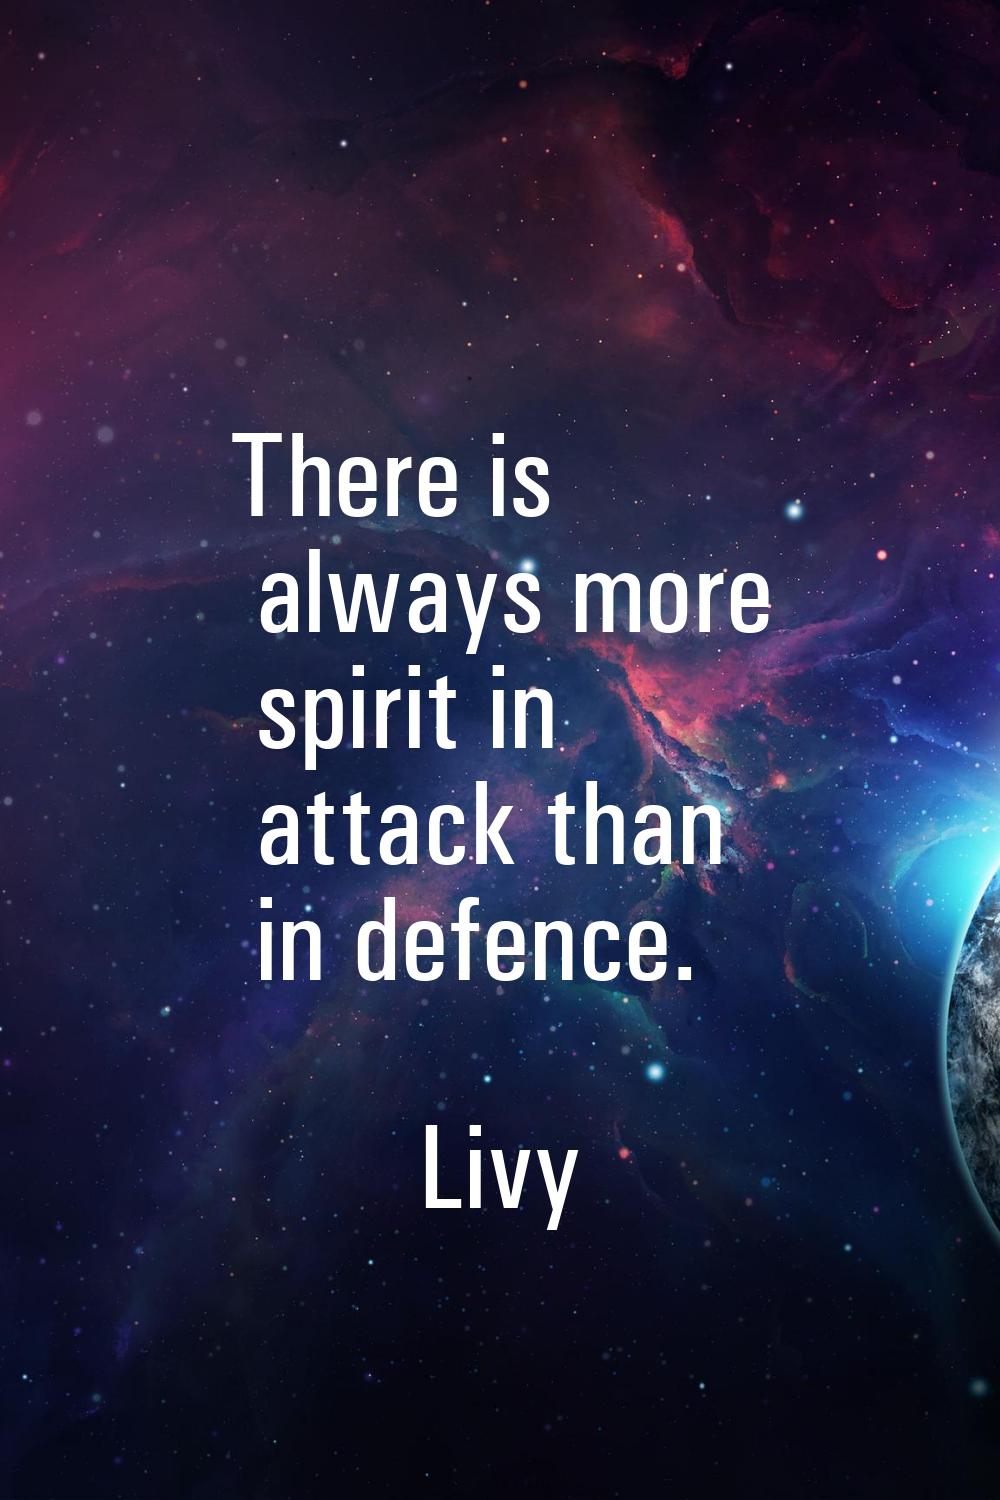 There is always more spirit in attack than in defence.